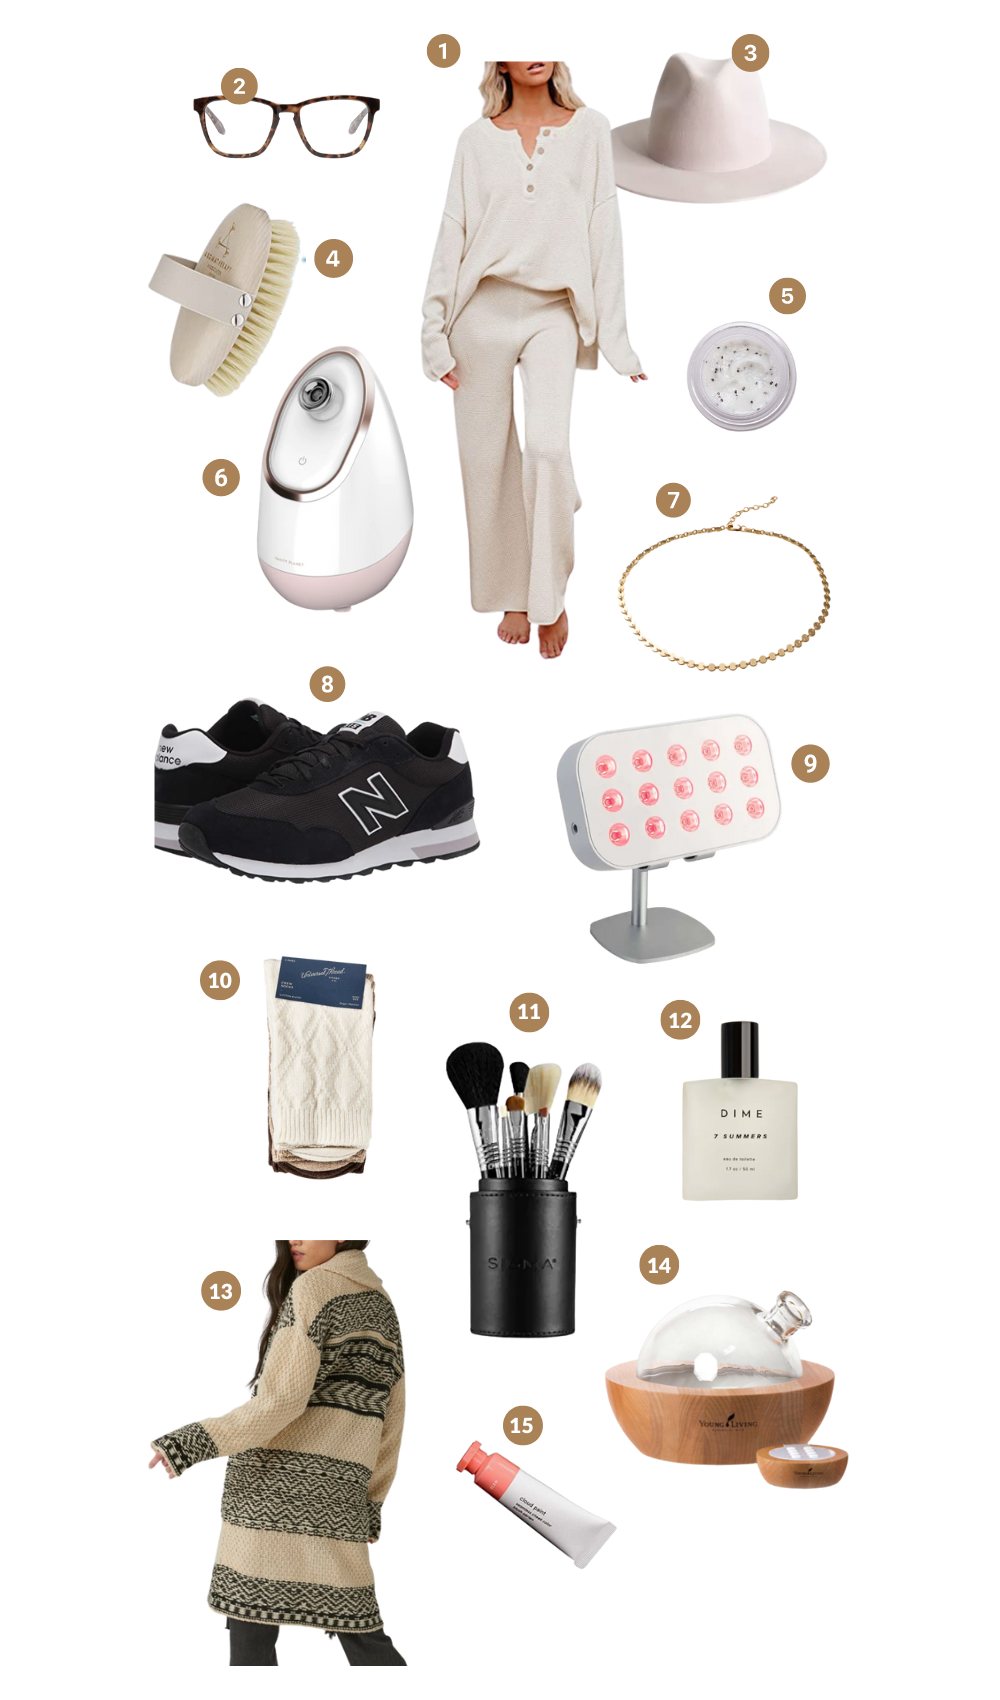 Holiday gift guide & stocking stuffer inspiration for her this holiday season! It's my 2022 gift guide for her and I hope you find something you would love to give or get this Christmas season! Be sure and catch the full Gift Guide Week over on KaraLayne.com!